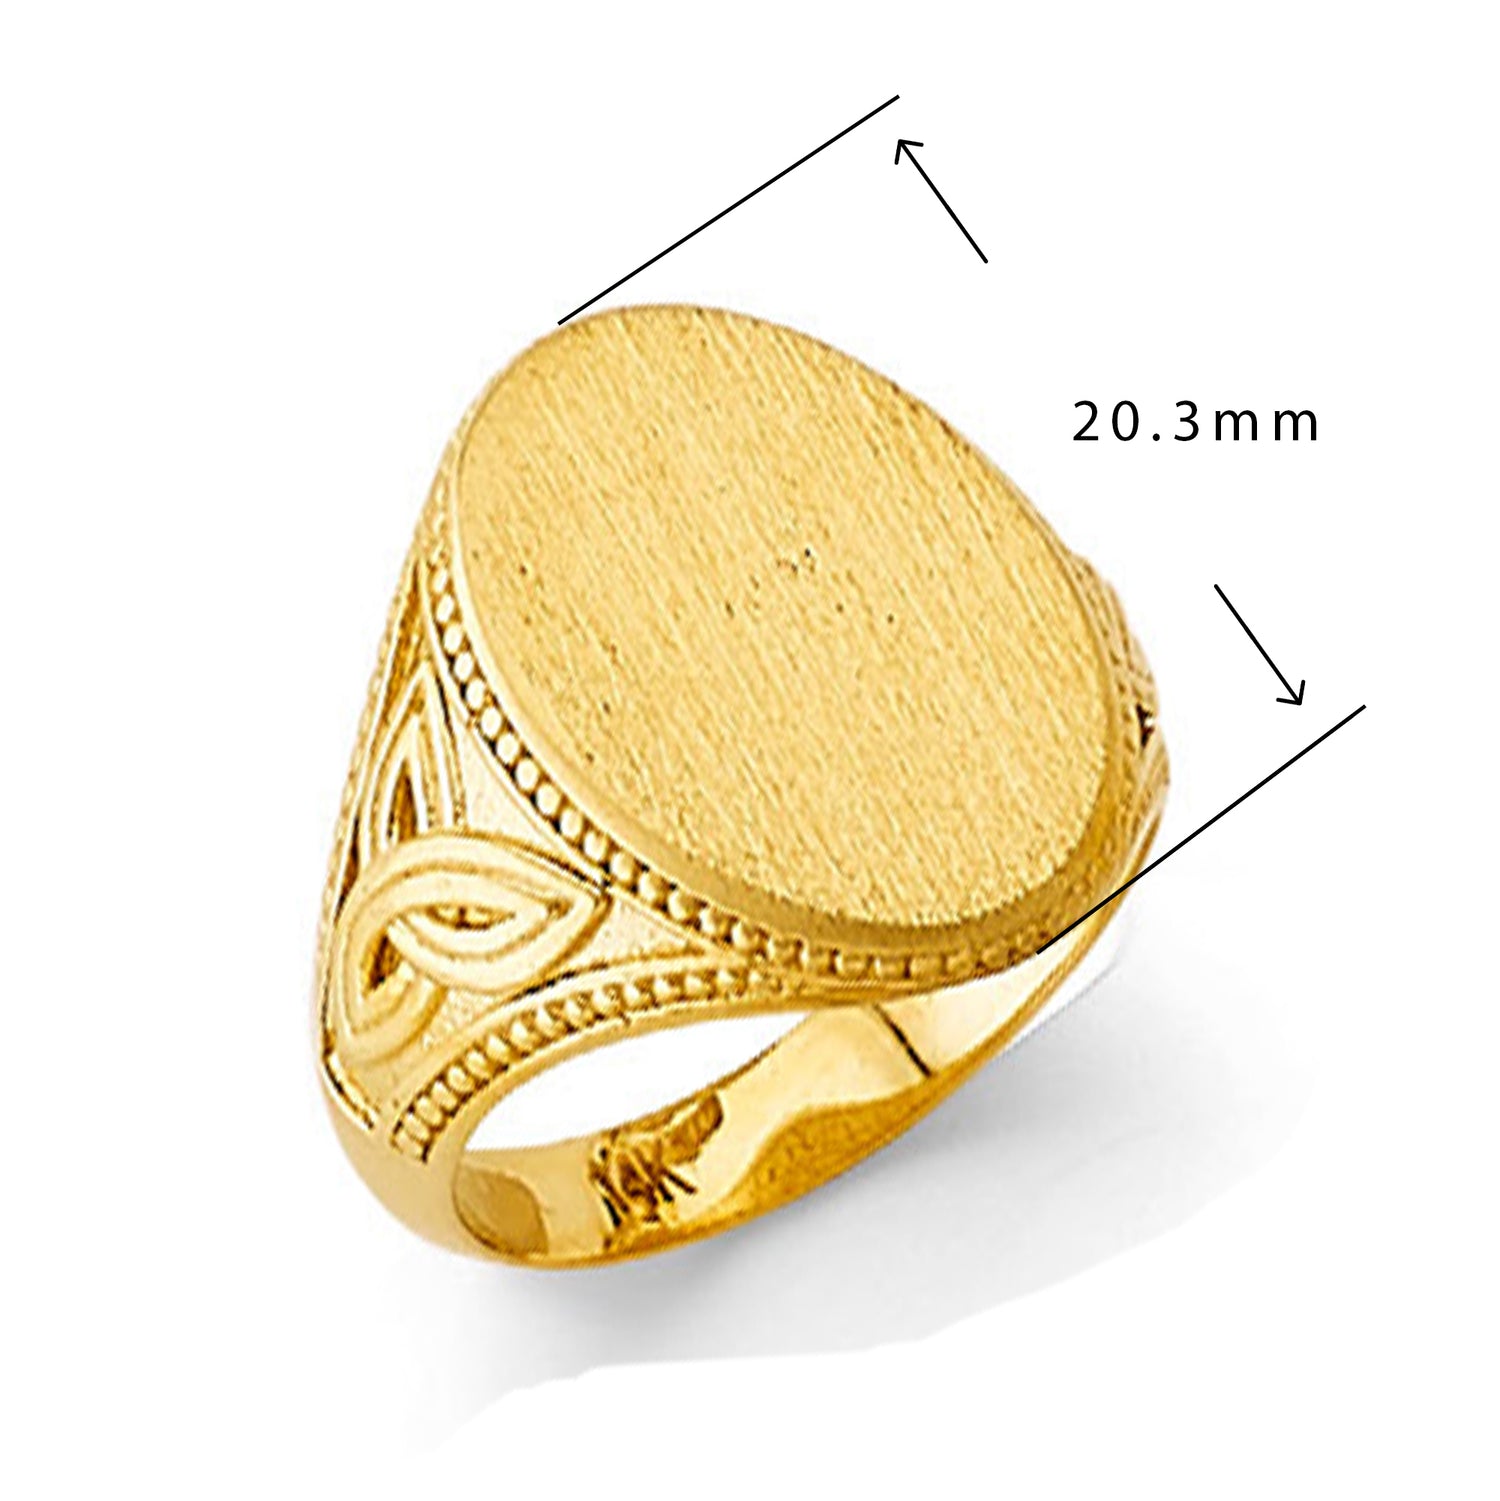 Fancy Filigree Oval Signet Ring in Solid Gold with Measurement